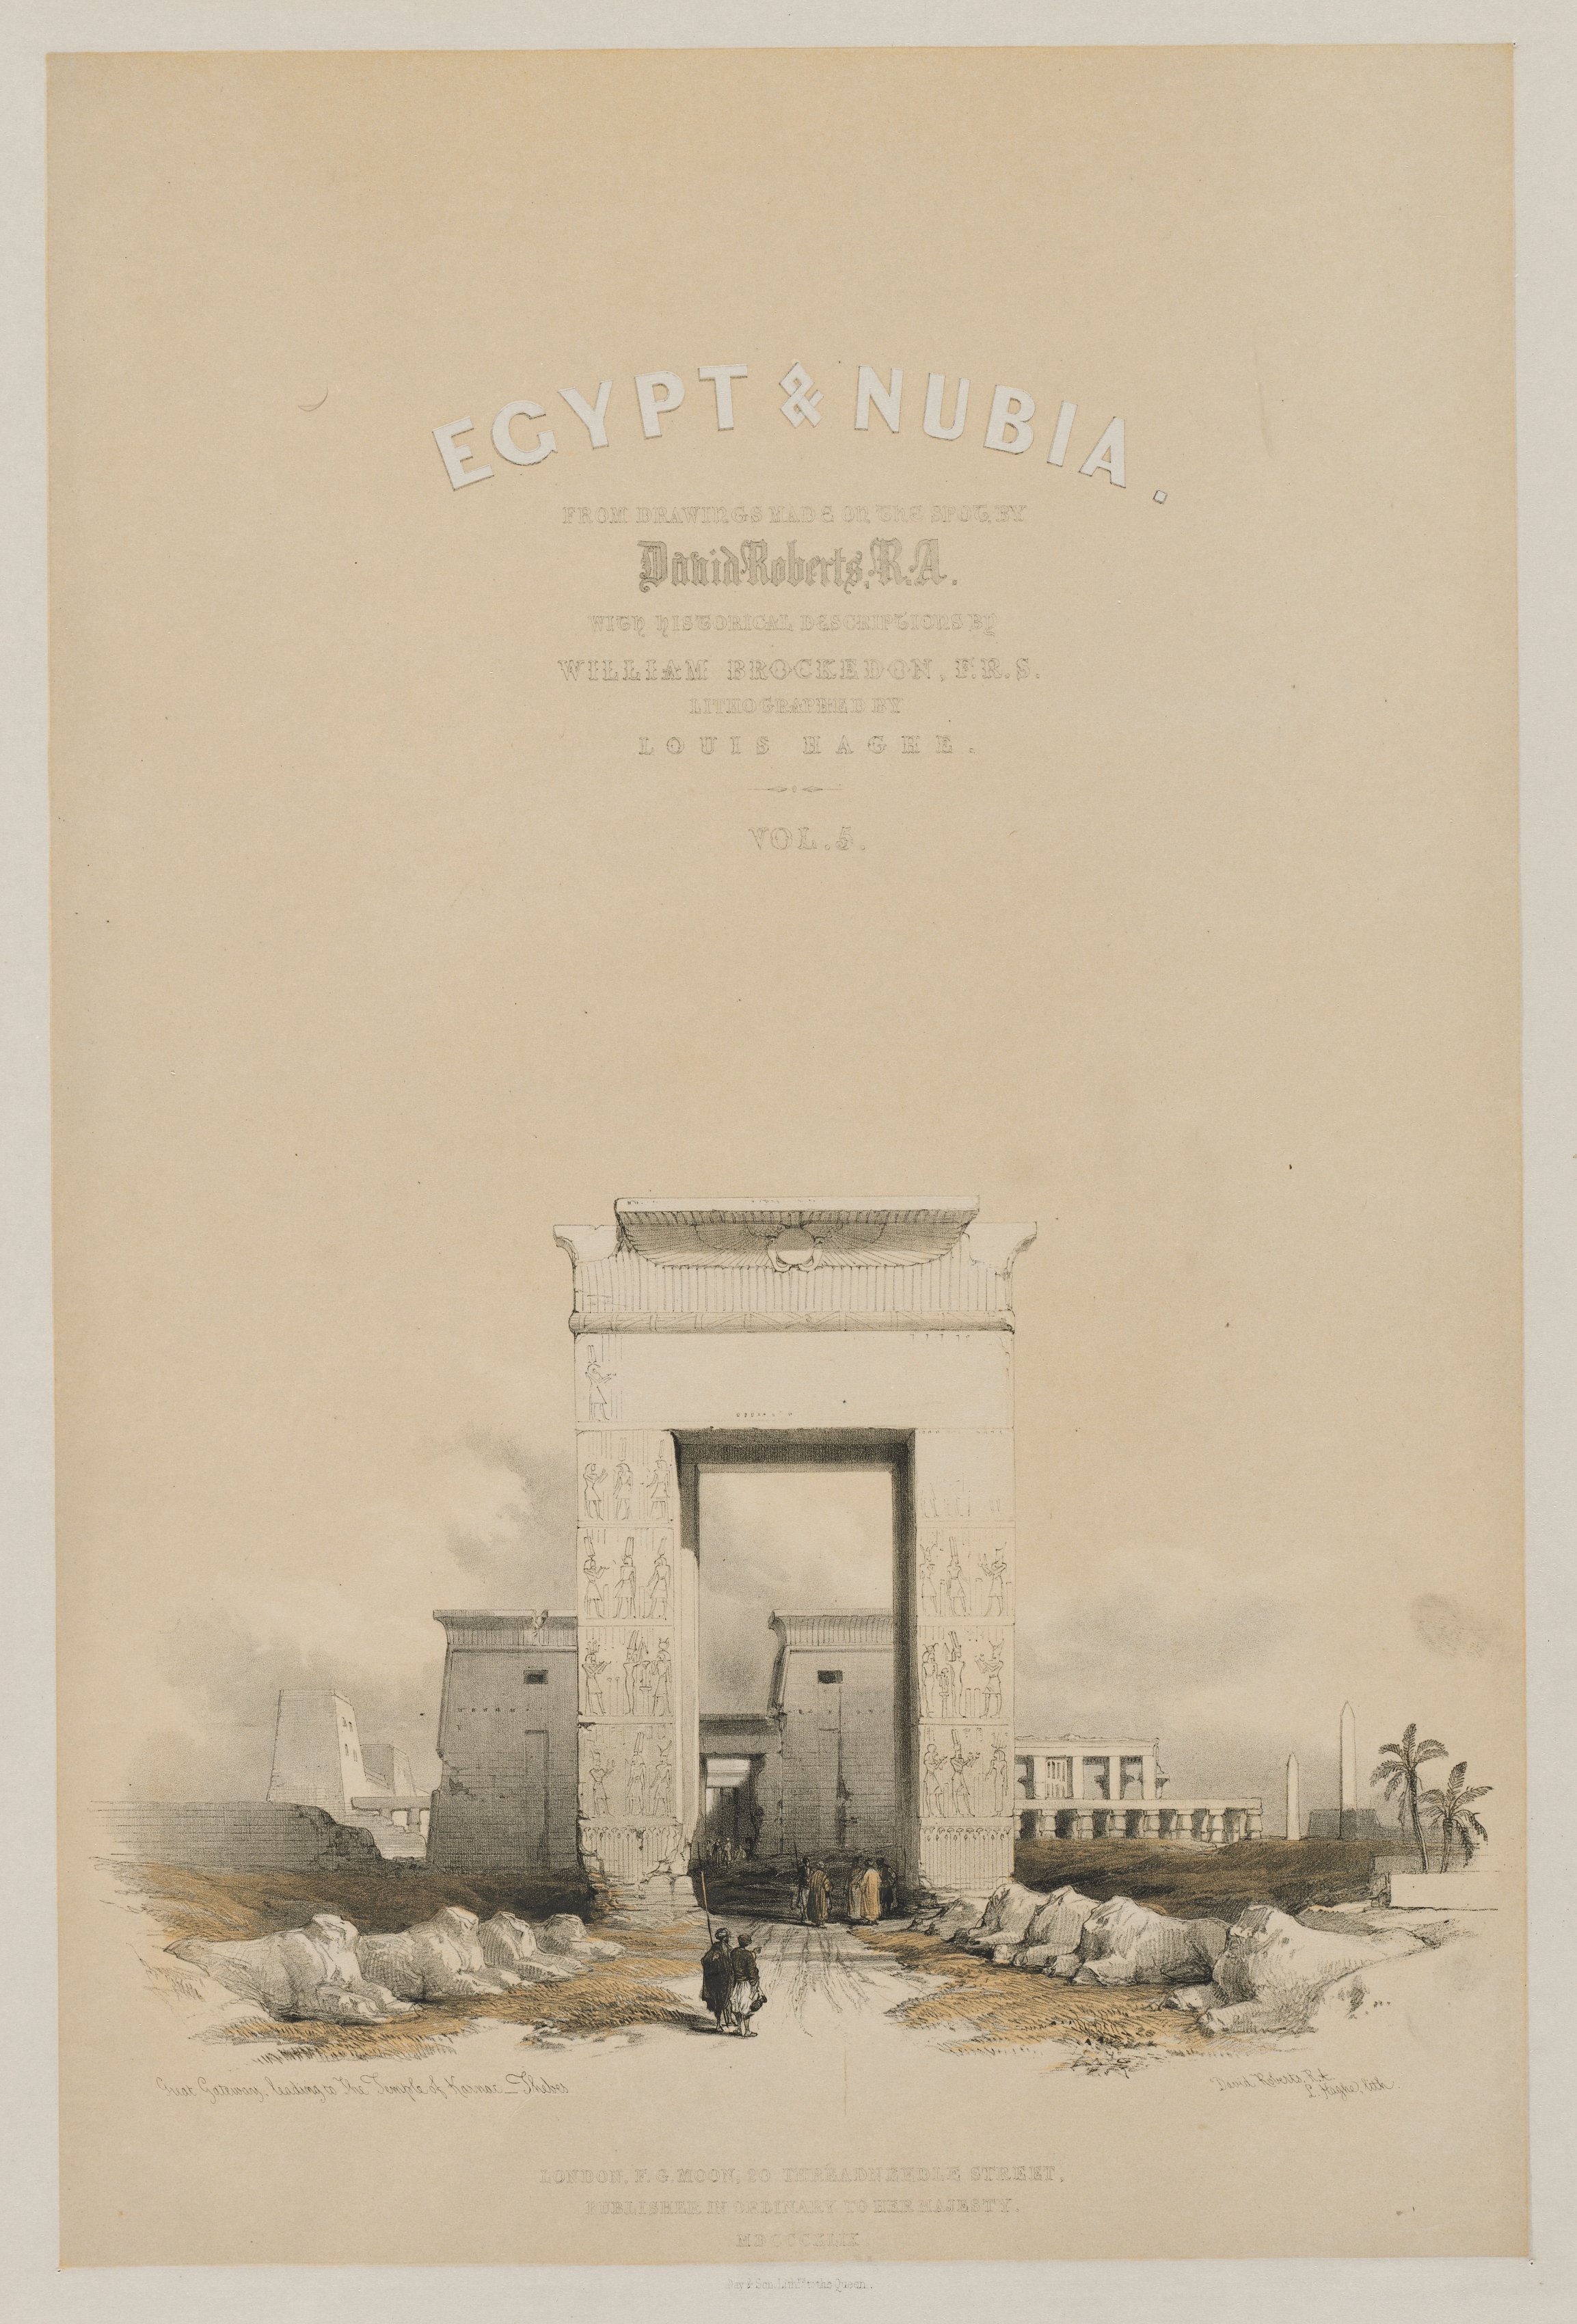 Egypt and Nubia: Frontispiece Volume V